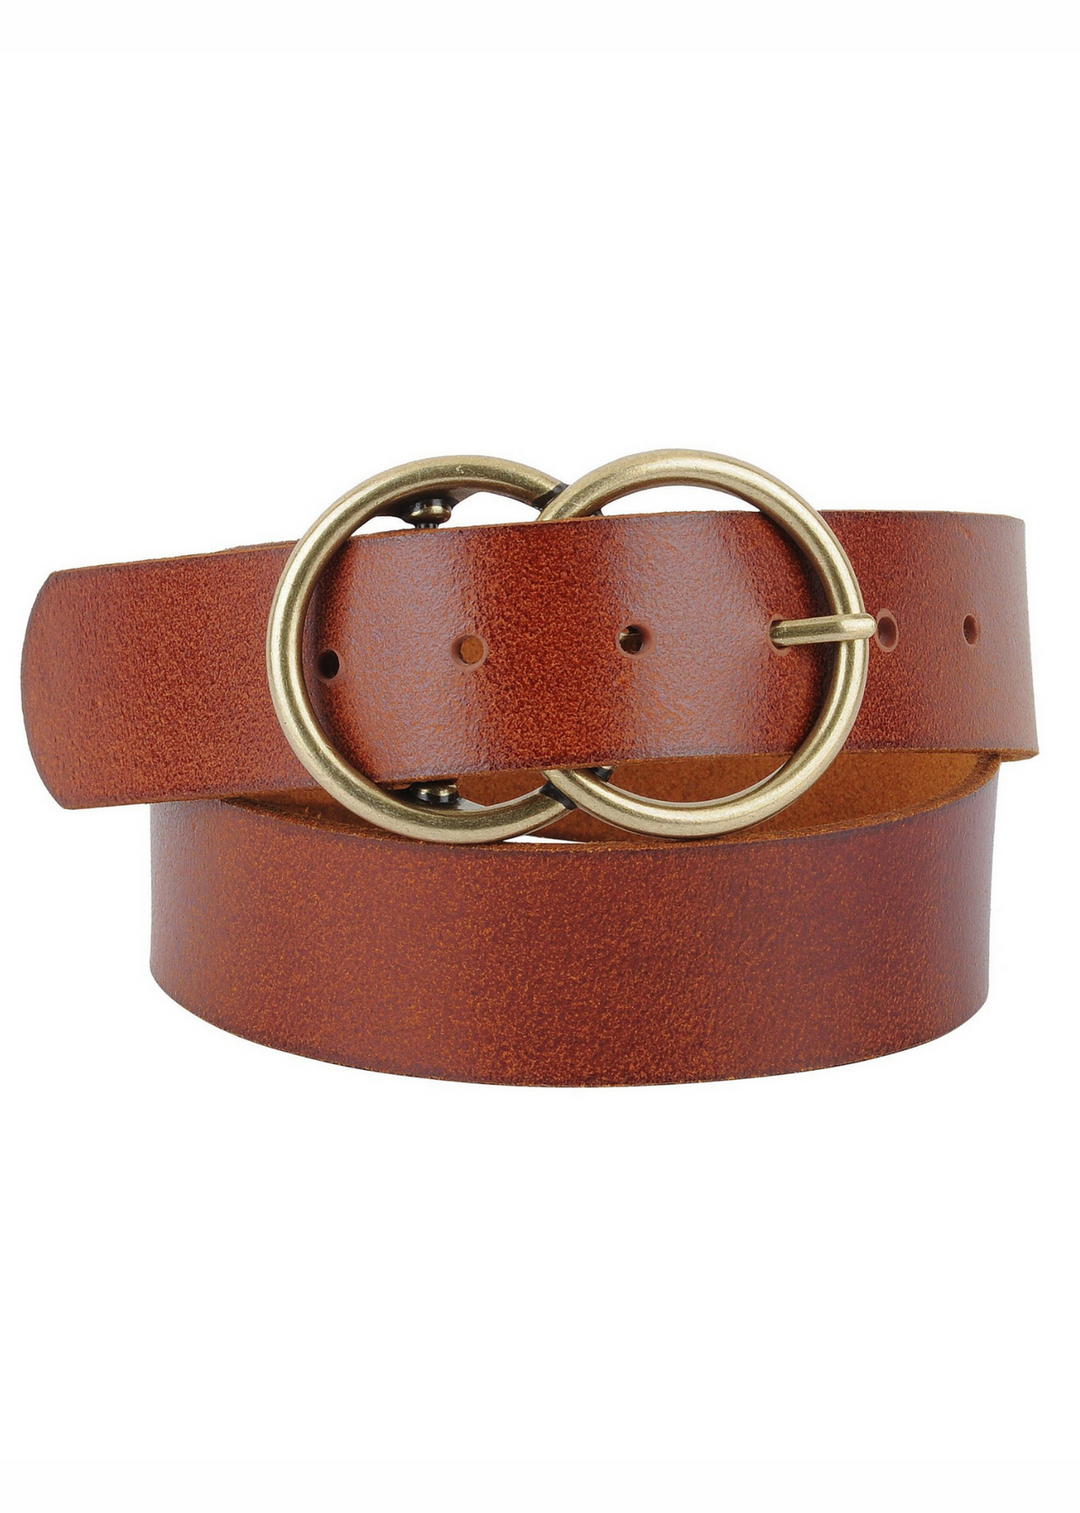 Most Wanted 1.75" Double Ring Belt (Tan)